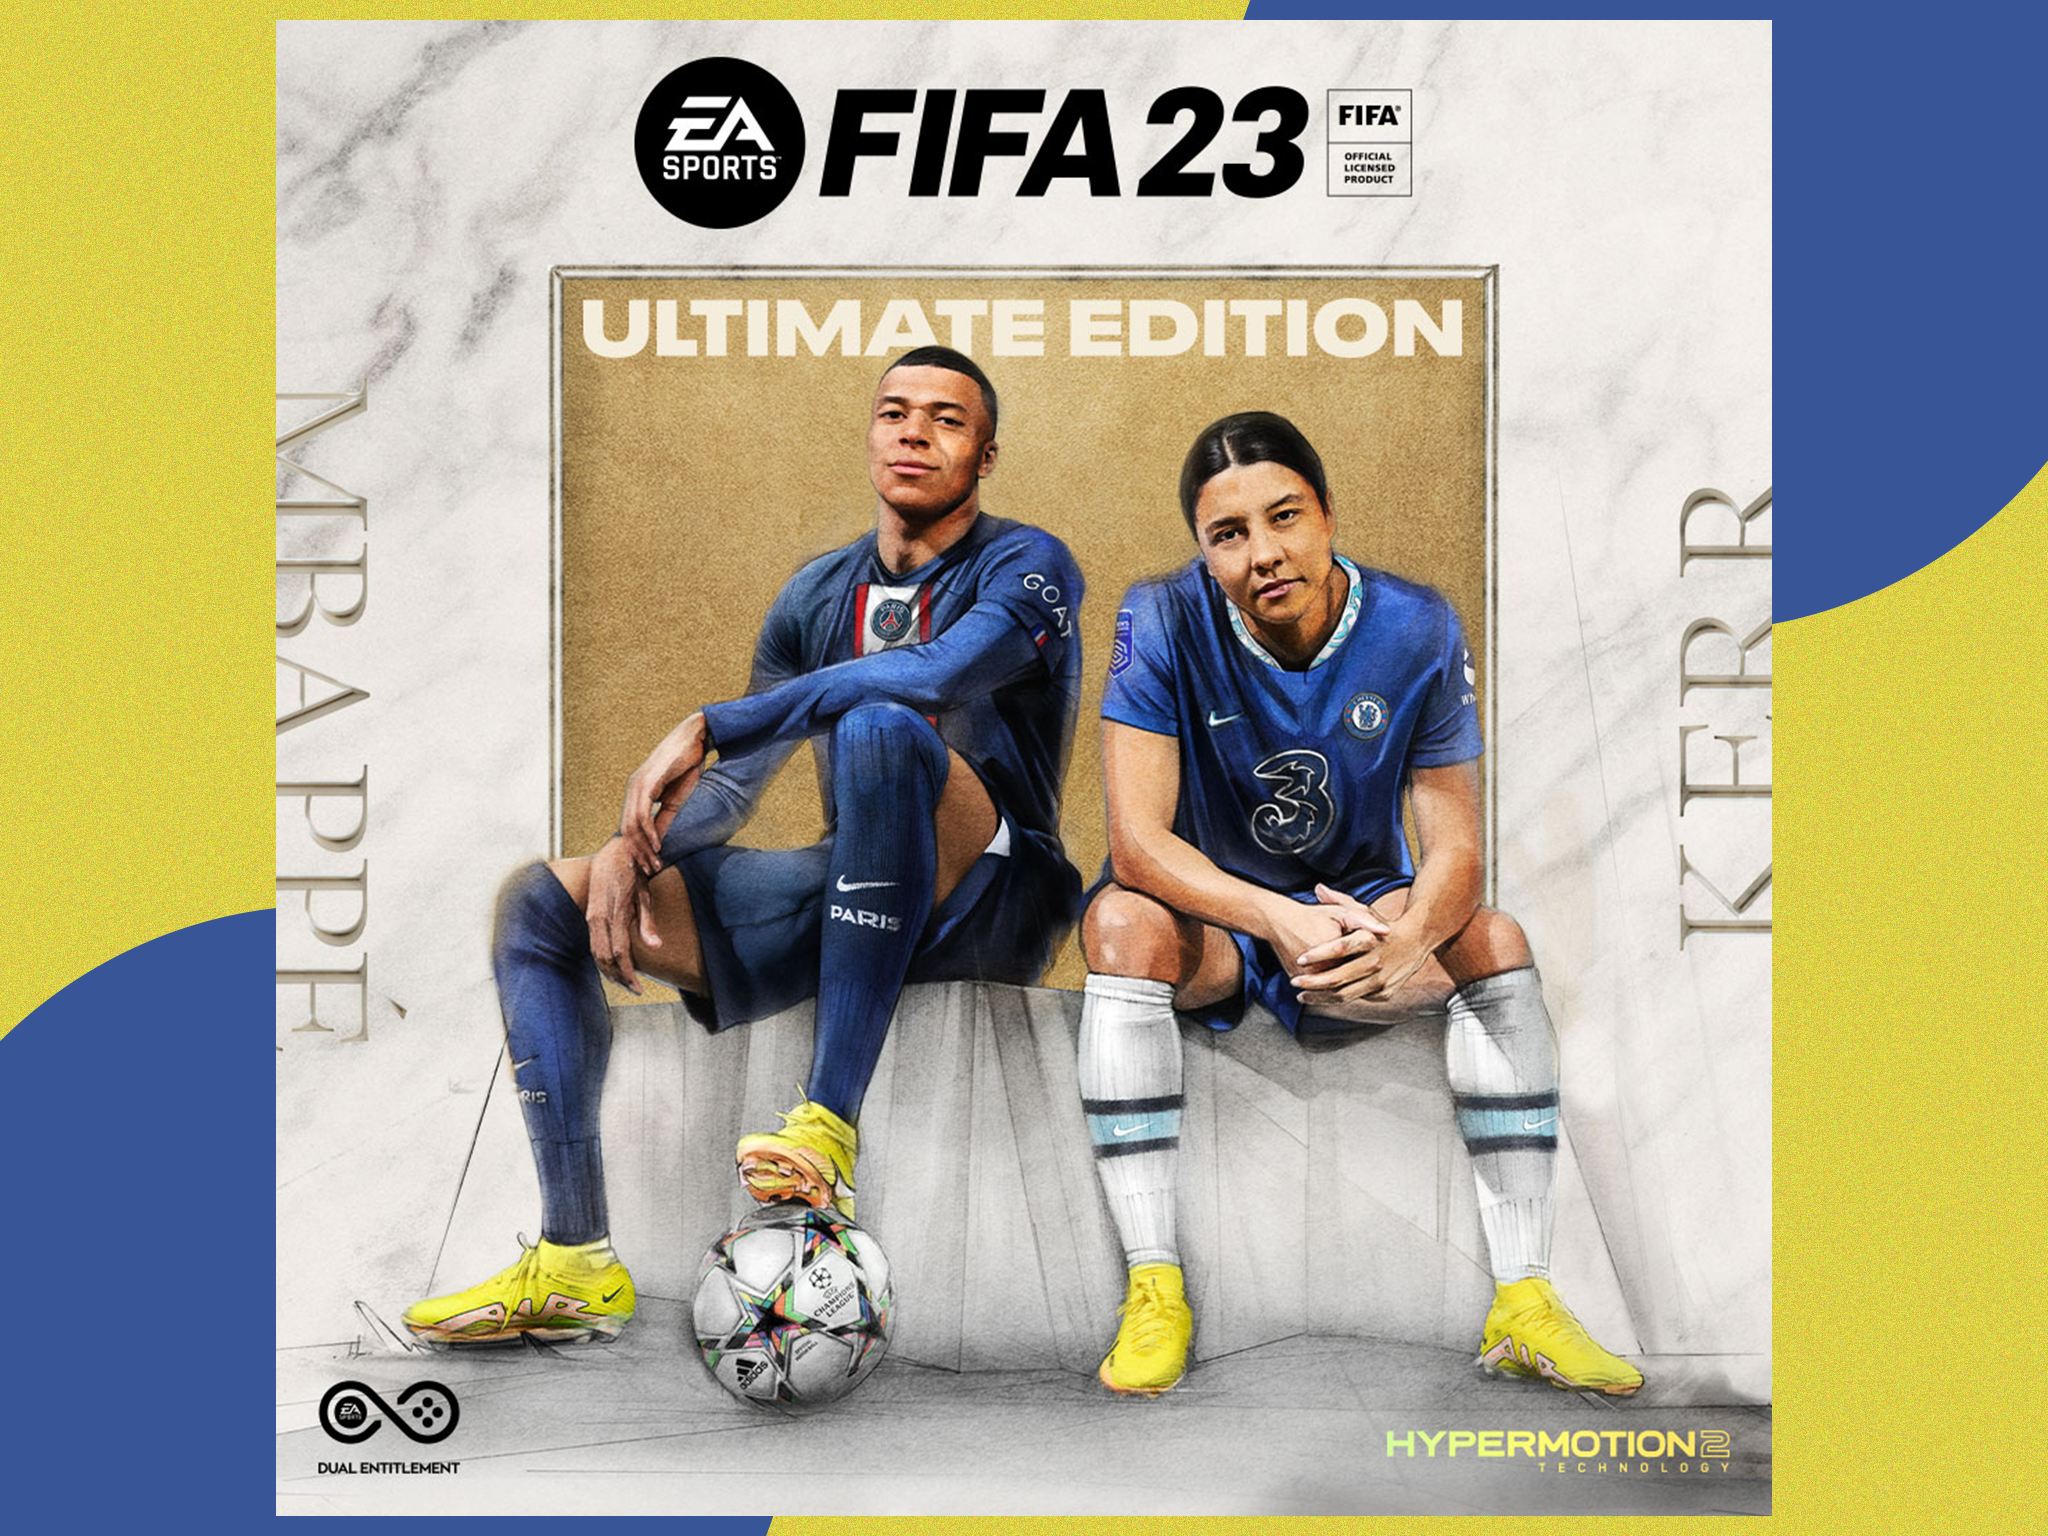 FIFA 23: Confirmed release date, reveal trailer, cover star and more